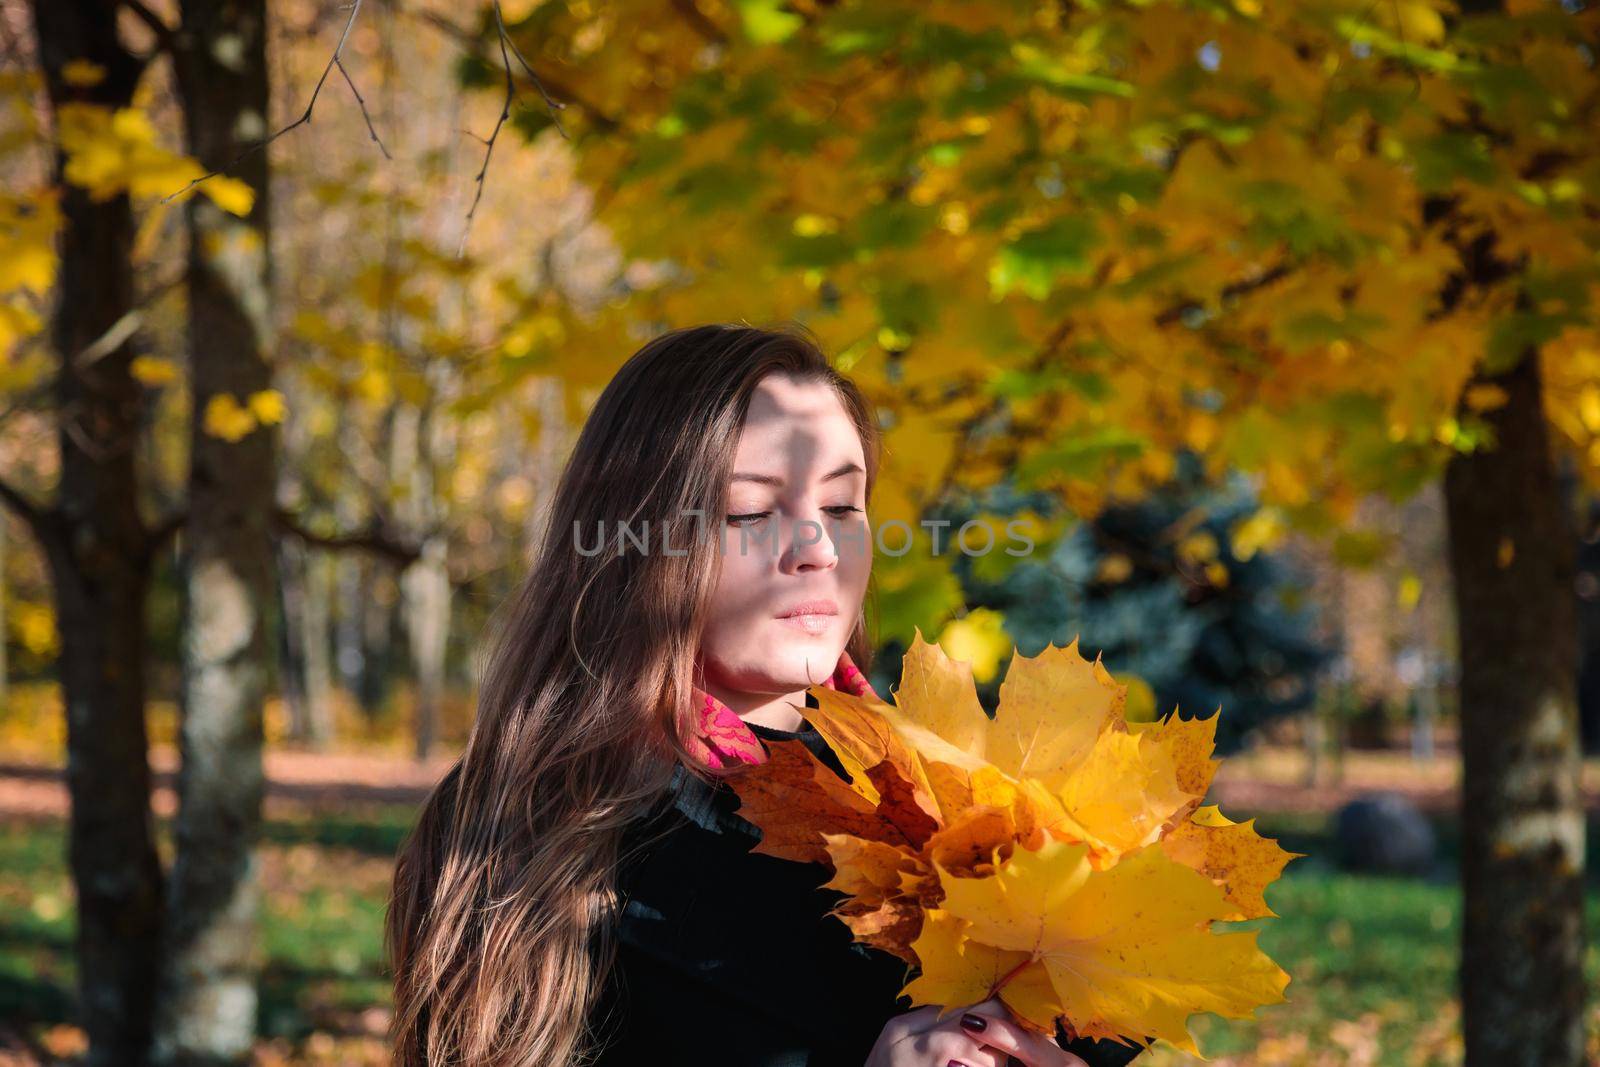 A woman with long hair looks at yellow leaves in an autumn park. by Yurich32